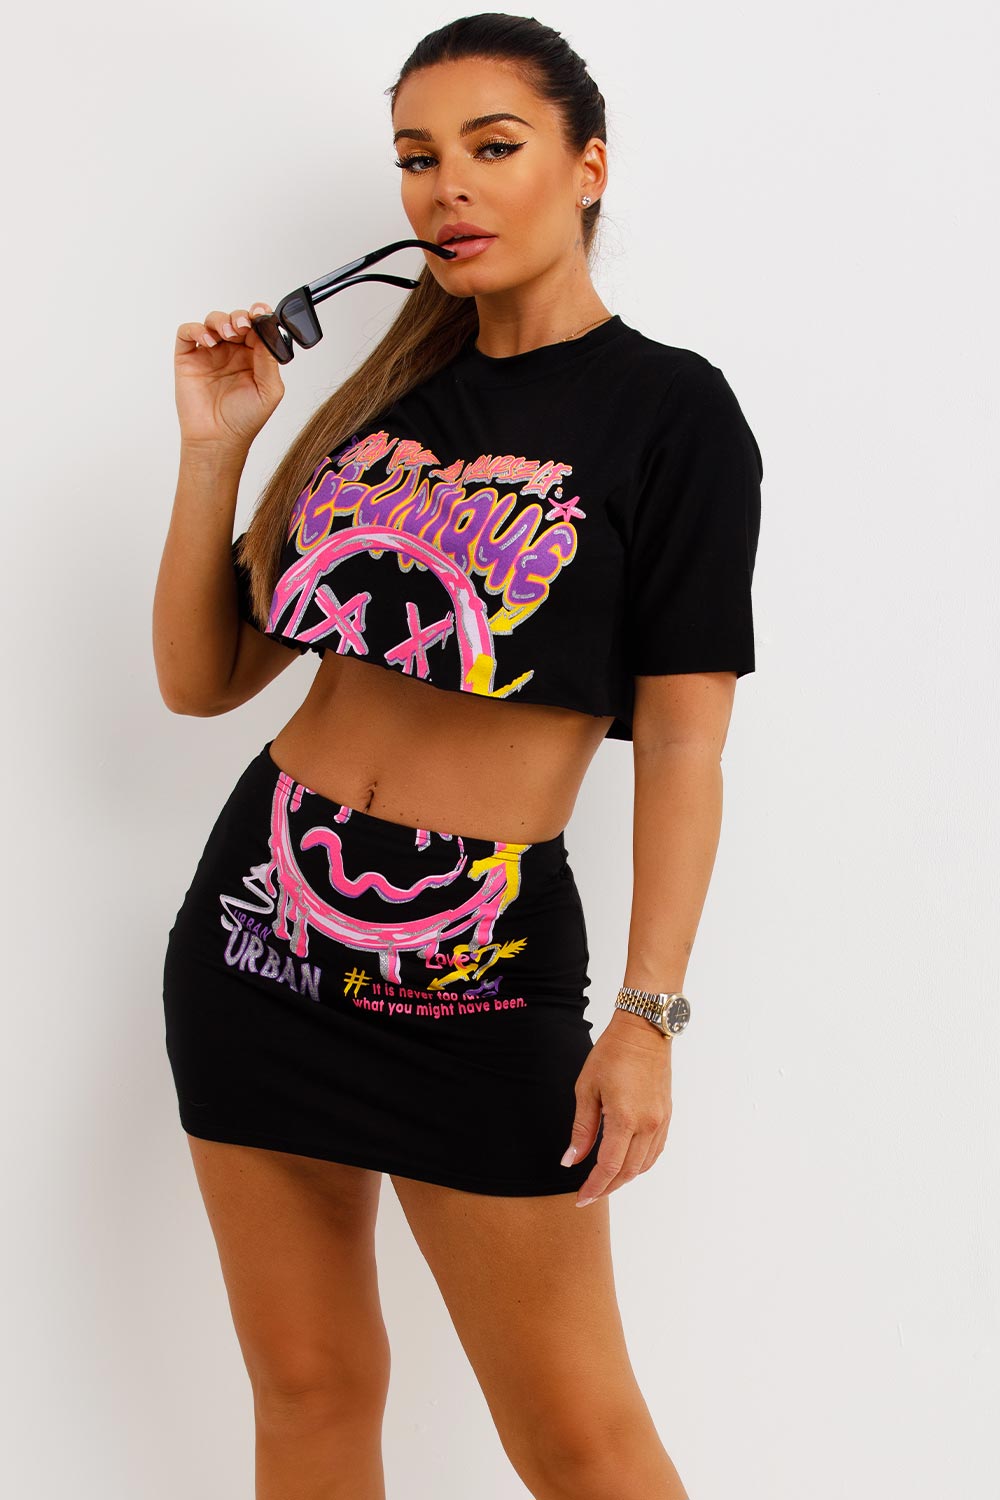 mini skirt and crop top with neon graphic print